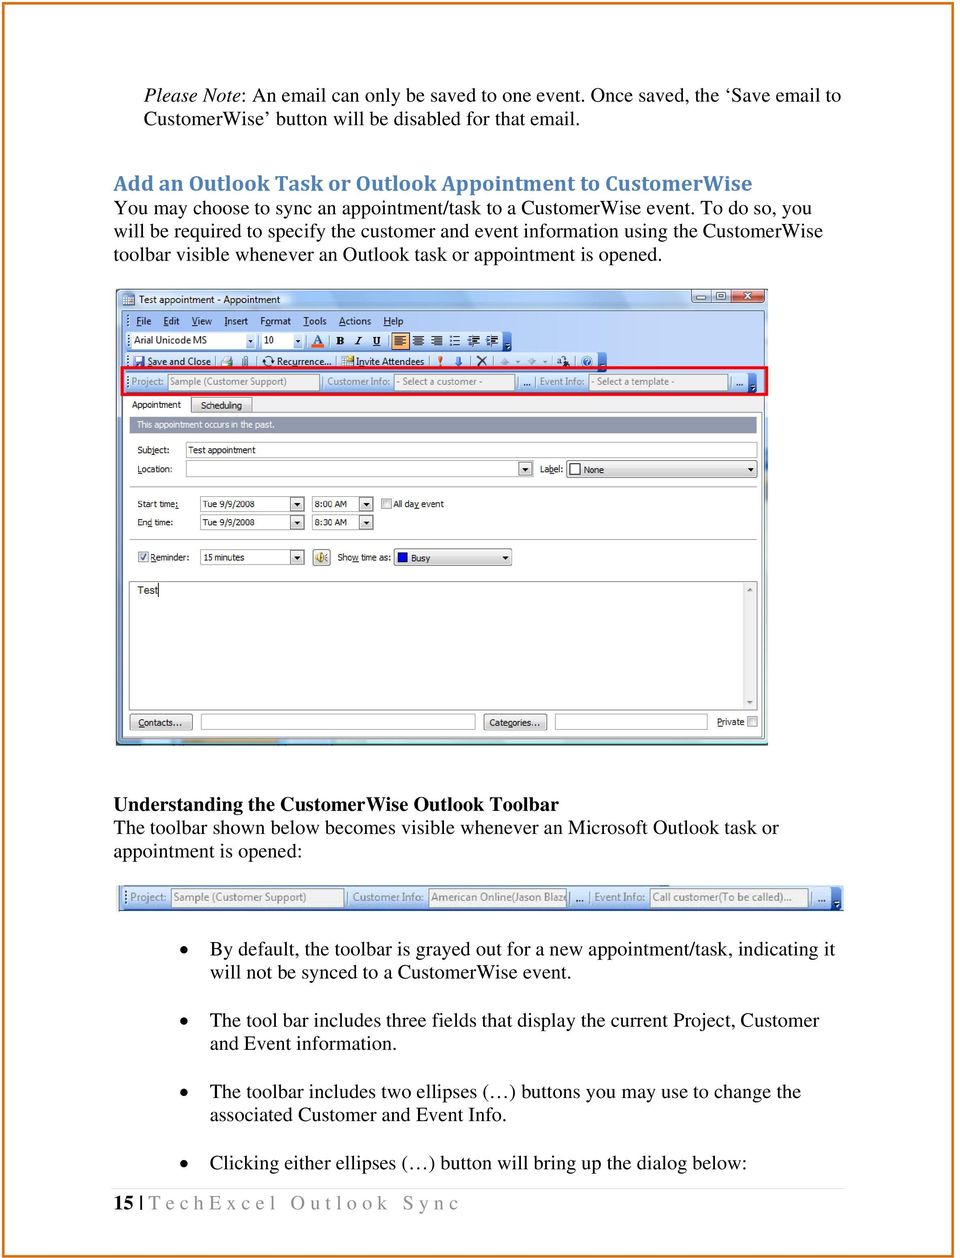 To do so, you will be required to specify the customer and event information using the CustomerWise toolbar visible whenever an Outlook task or appointment is opened.